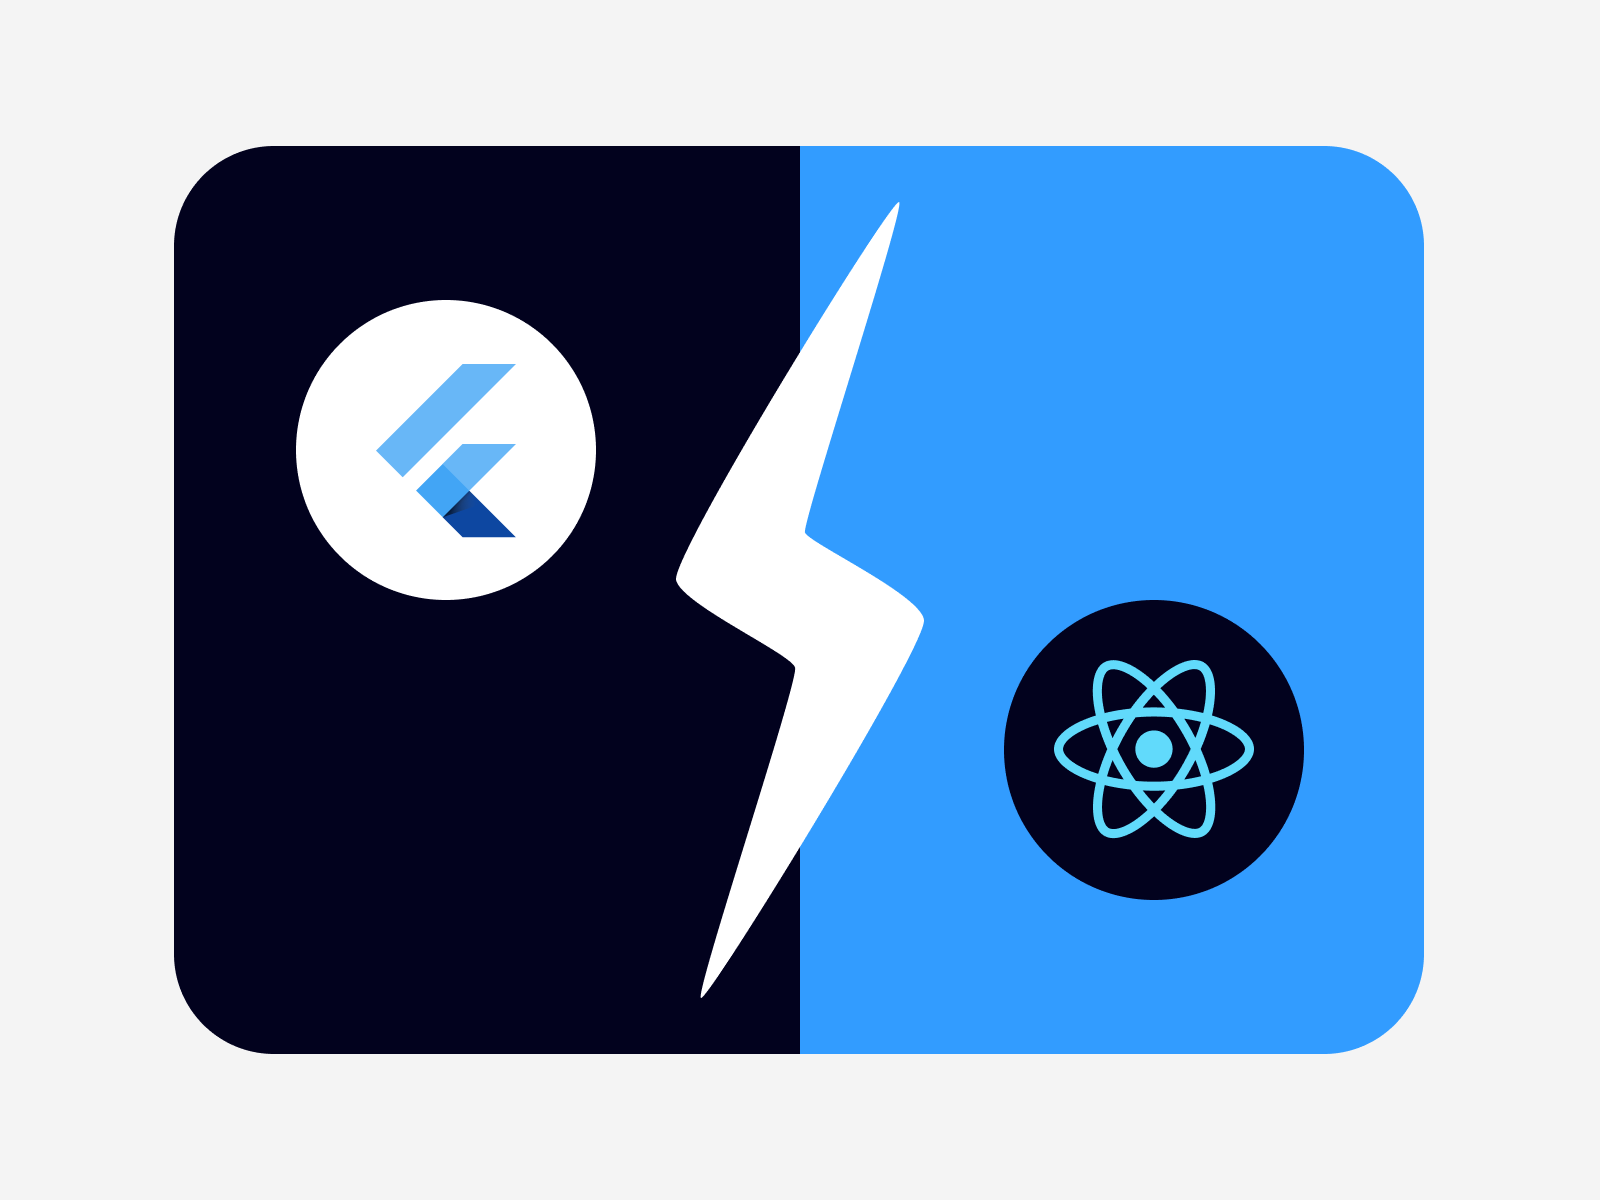 Flutter and React Native share a lot of similarities, but also different in a key ways